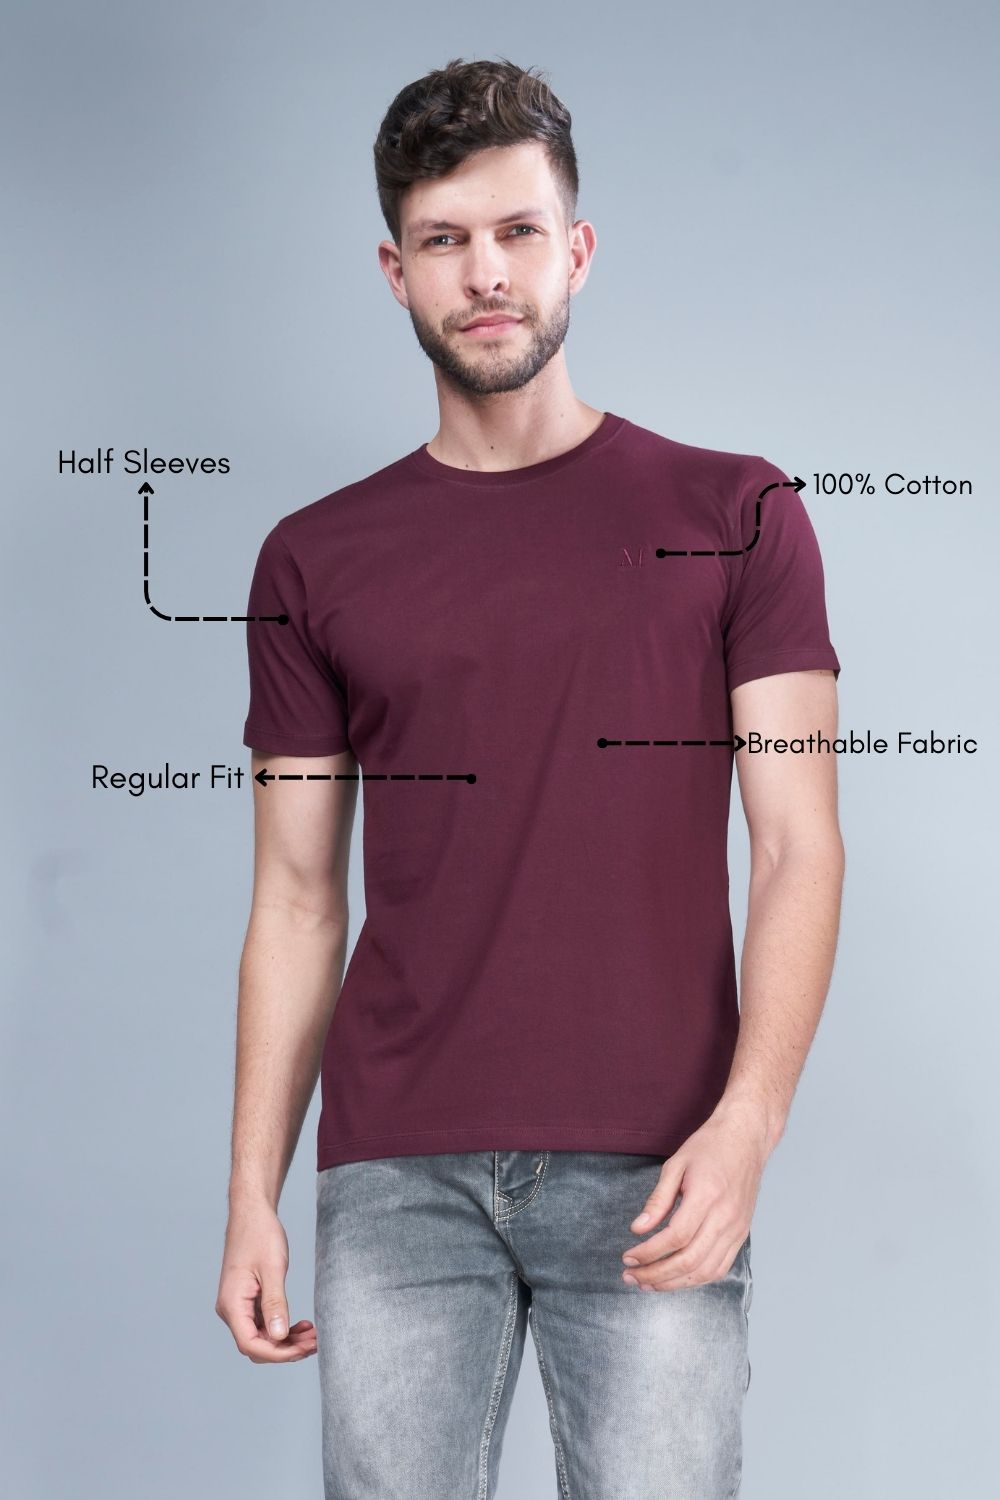 Heng Maroon colored, Solid T shirt for men, with half sleeves and round neck, product features.